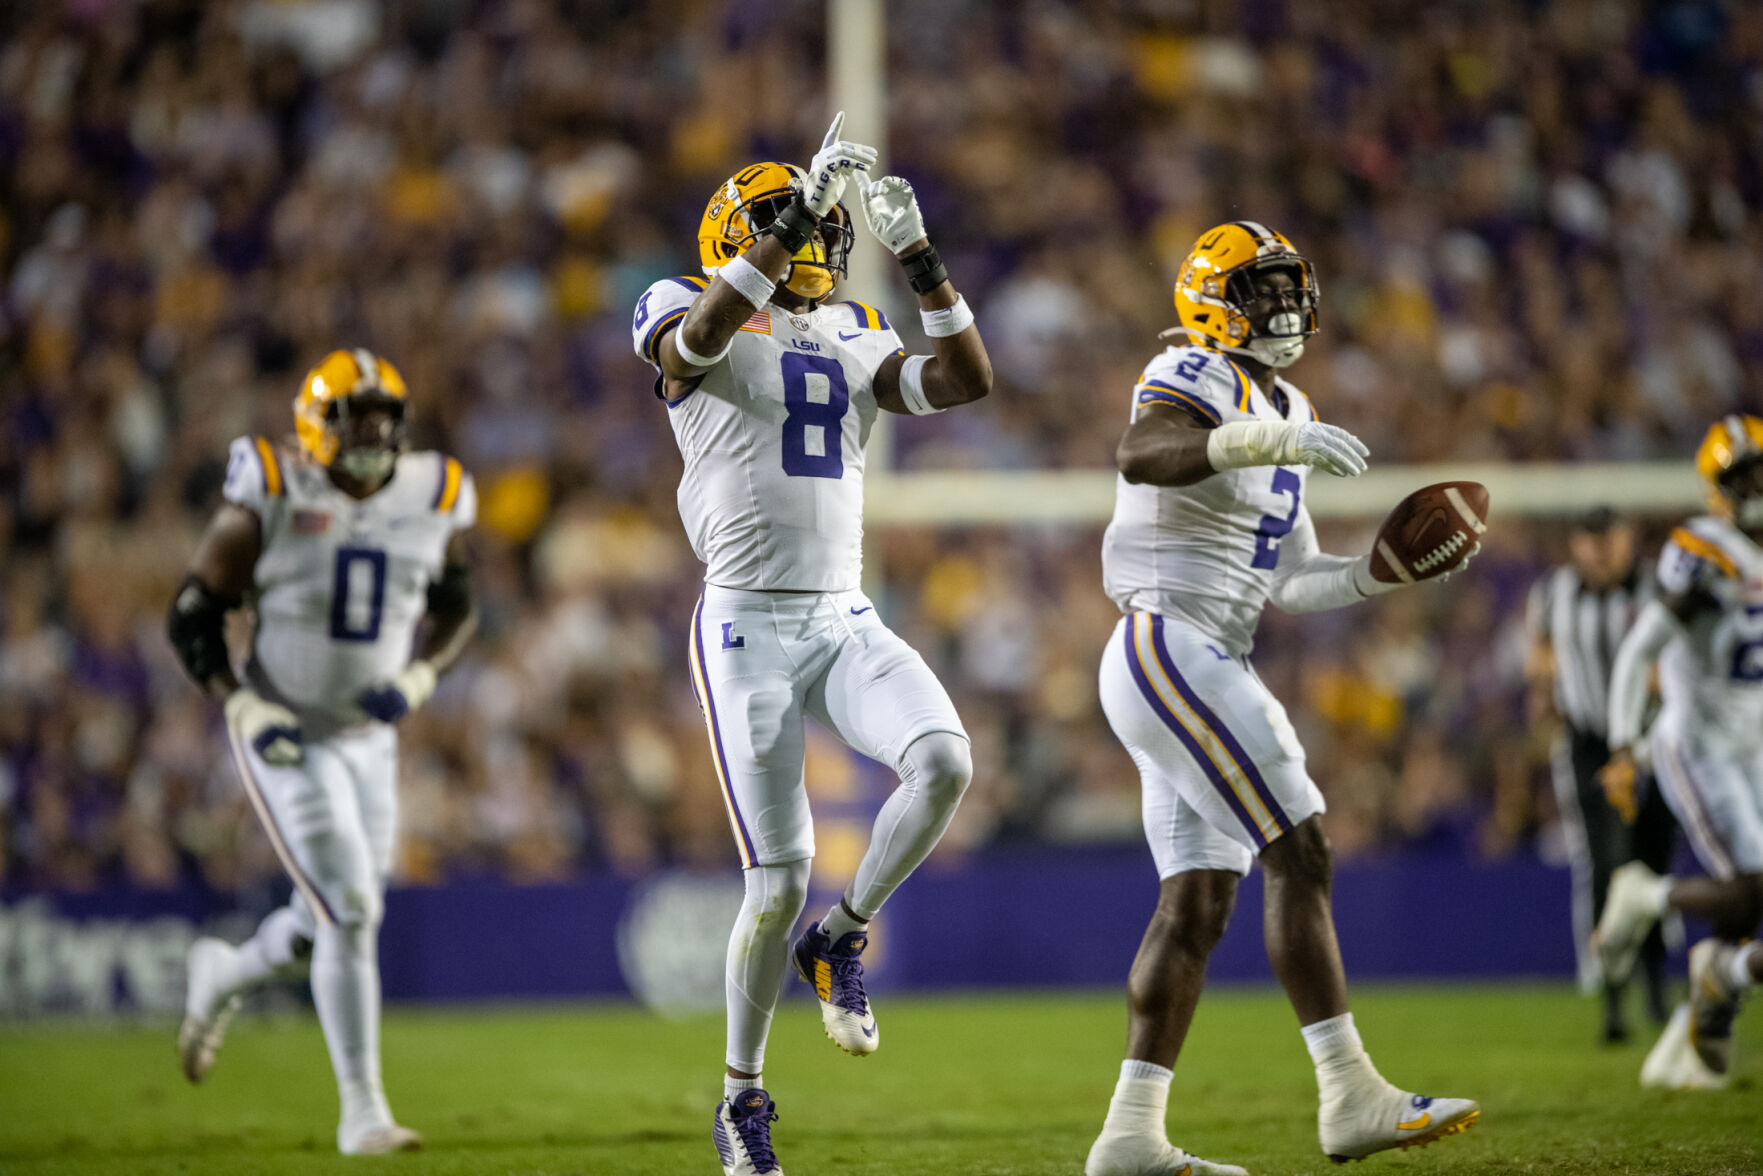 LSU football dominates from opening possession, beats Army 62-0